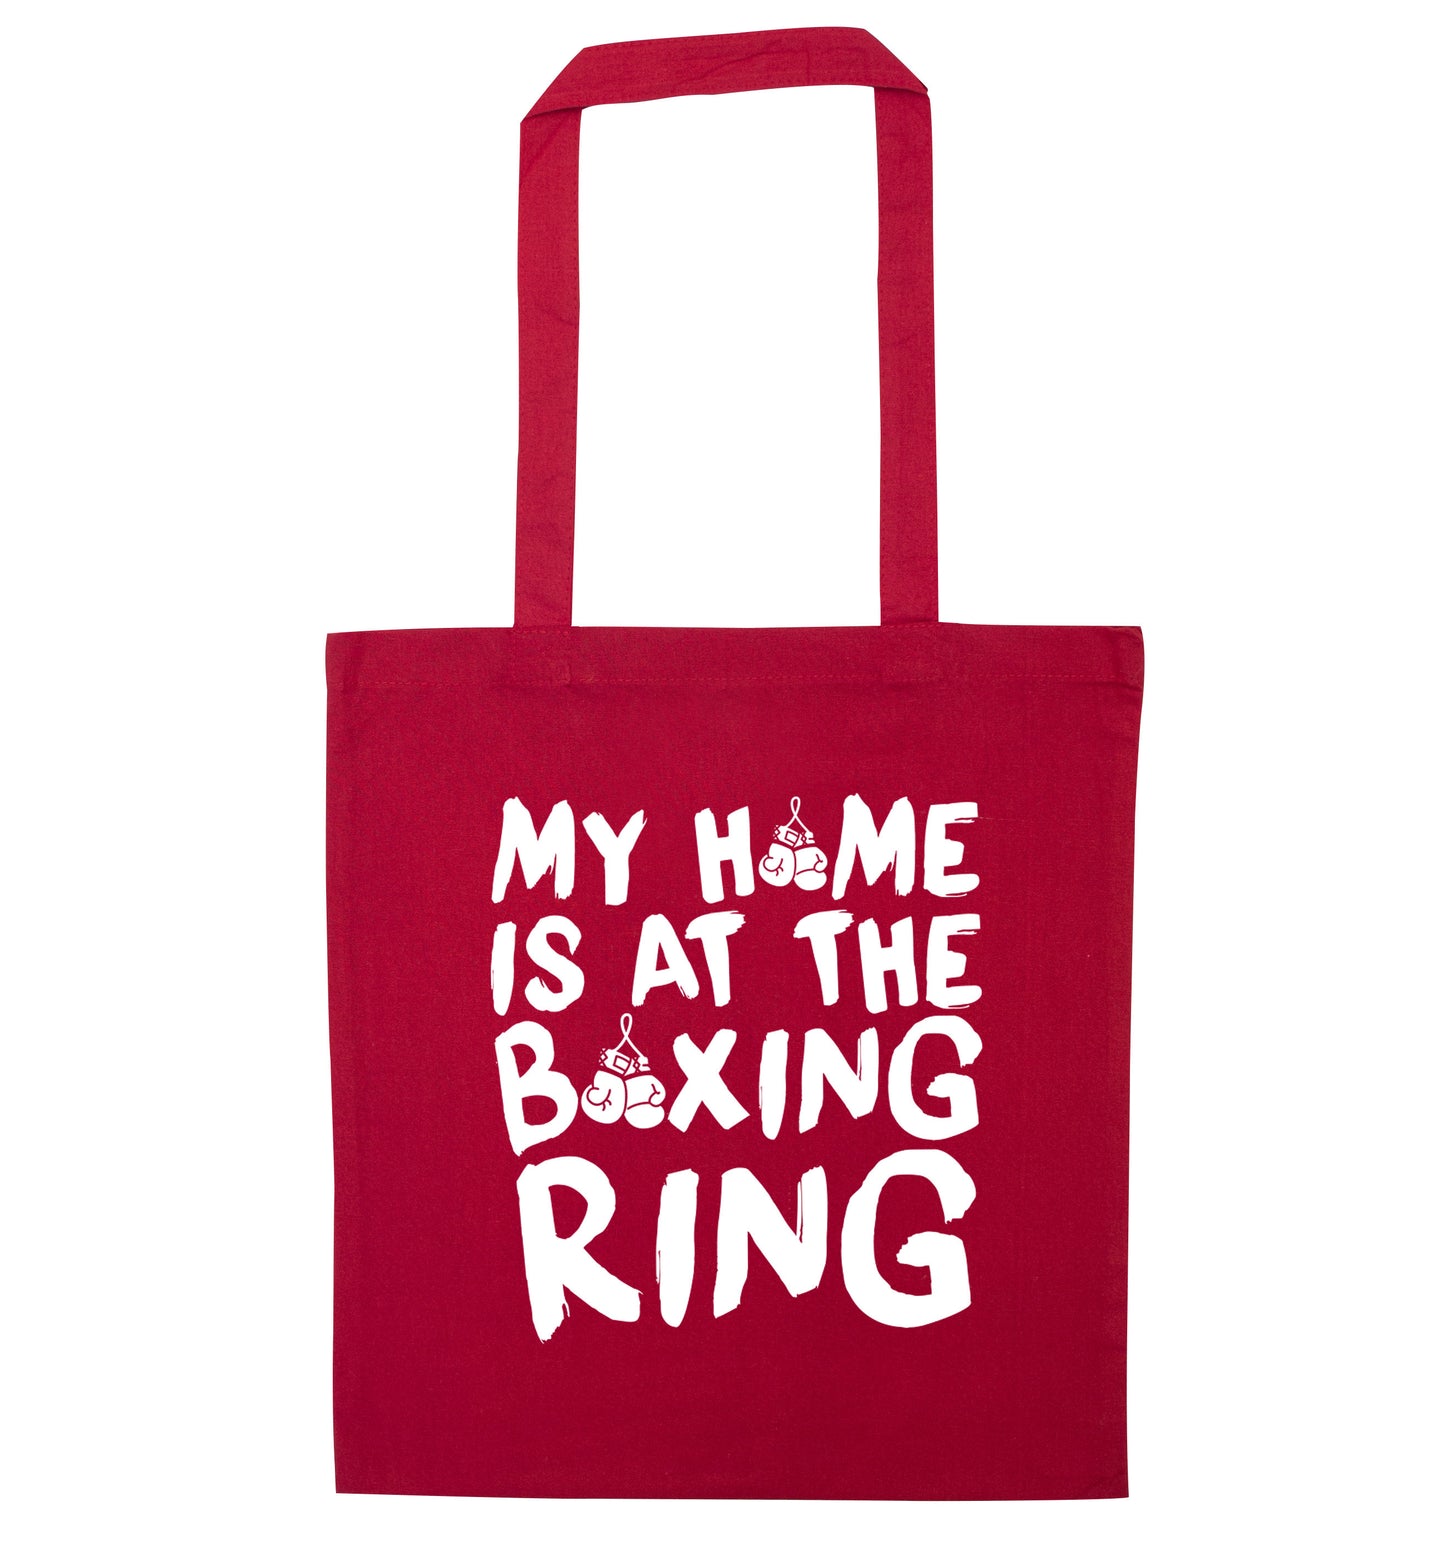 My home is at the boxing ring red tote bag